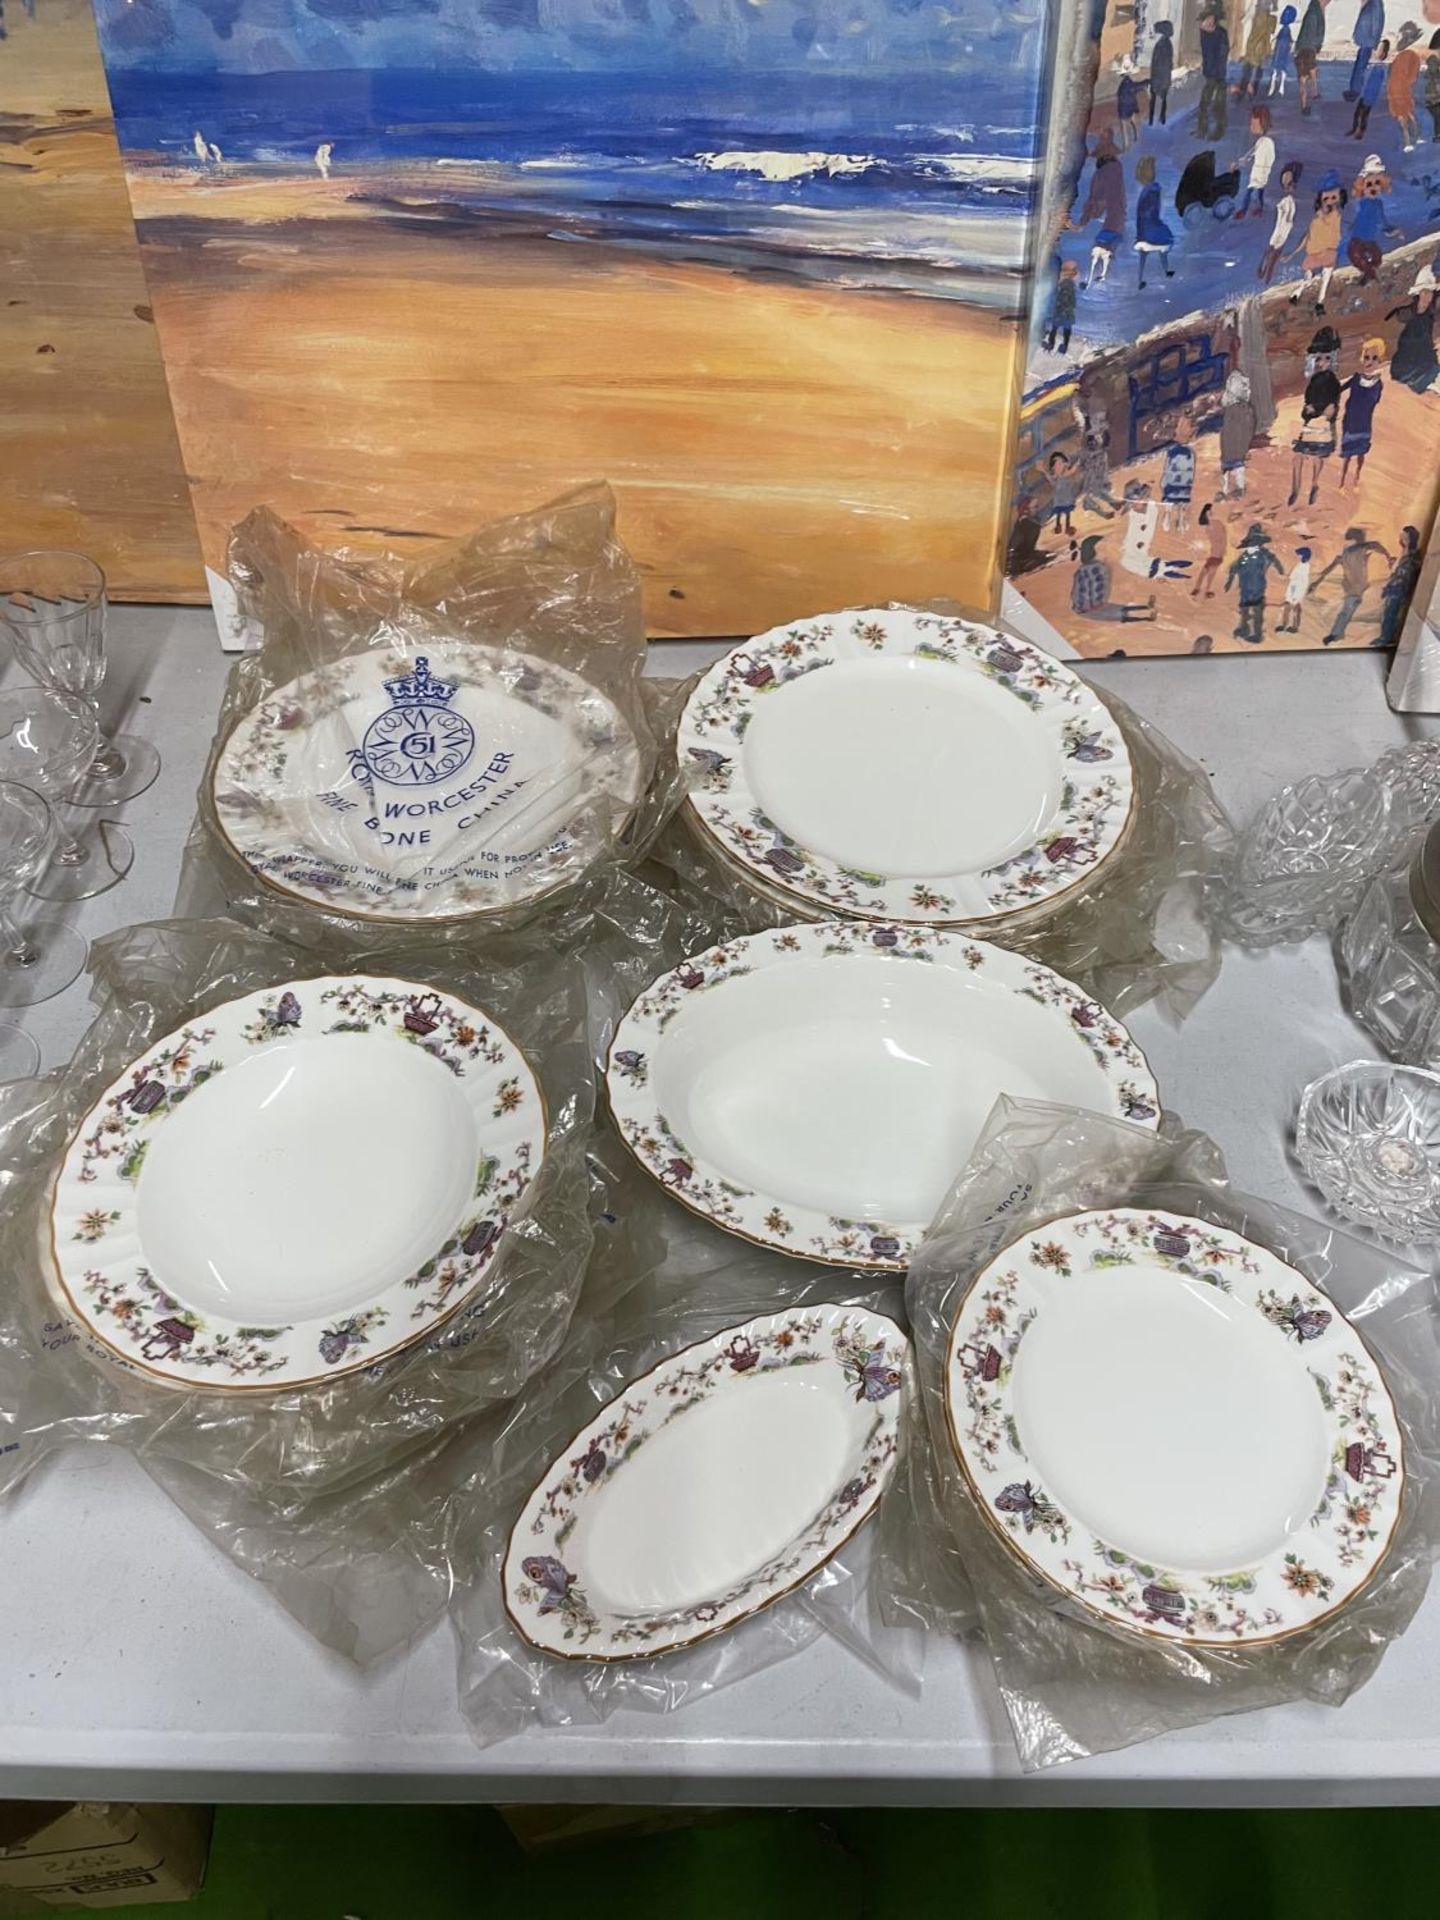 A COLLECTION OF ROYAL WORCESTER 'PEKIN' PLATES AND BOWLS, ETC WITH THE ROYAL WORCESTER PROTECTIVE